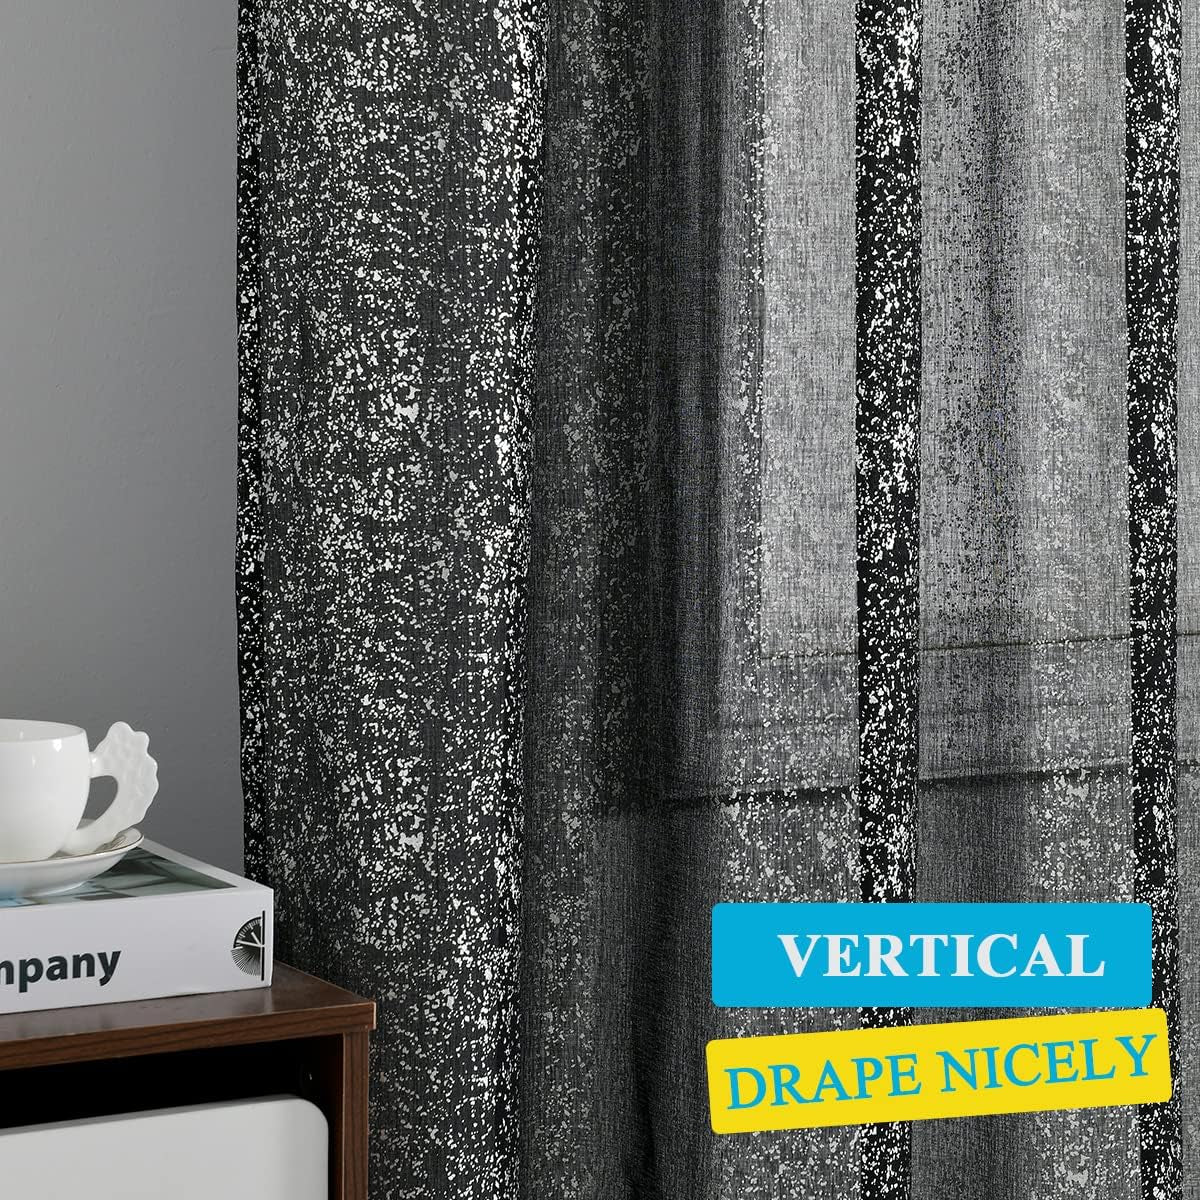 TERLYTEX Black and Silver Curtains 72 Inch Length - Metallic Silver Foil Spray Dots Glitter Sheer Curtains for Living Room, Privacy Sparkle Curtains for Windows, 52 X 72 Inch, 2 Panels, Black Silver  TERLYTEX   